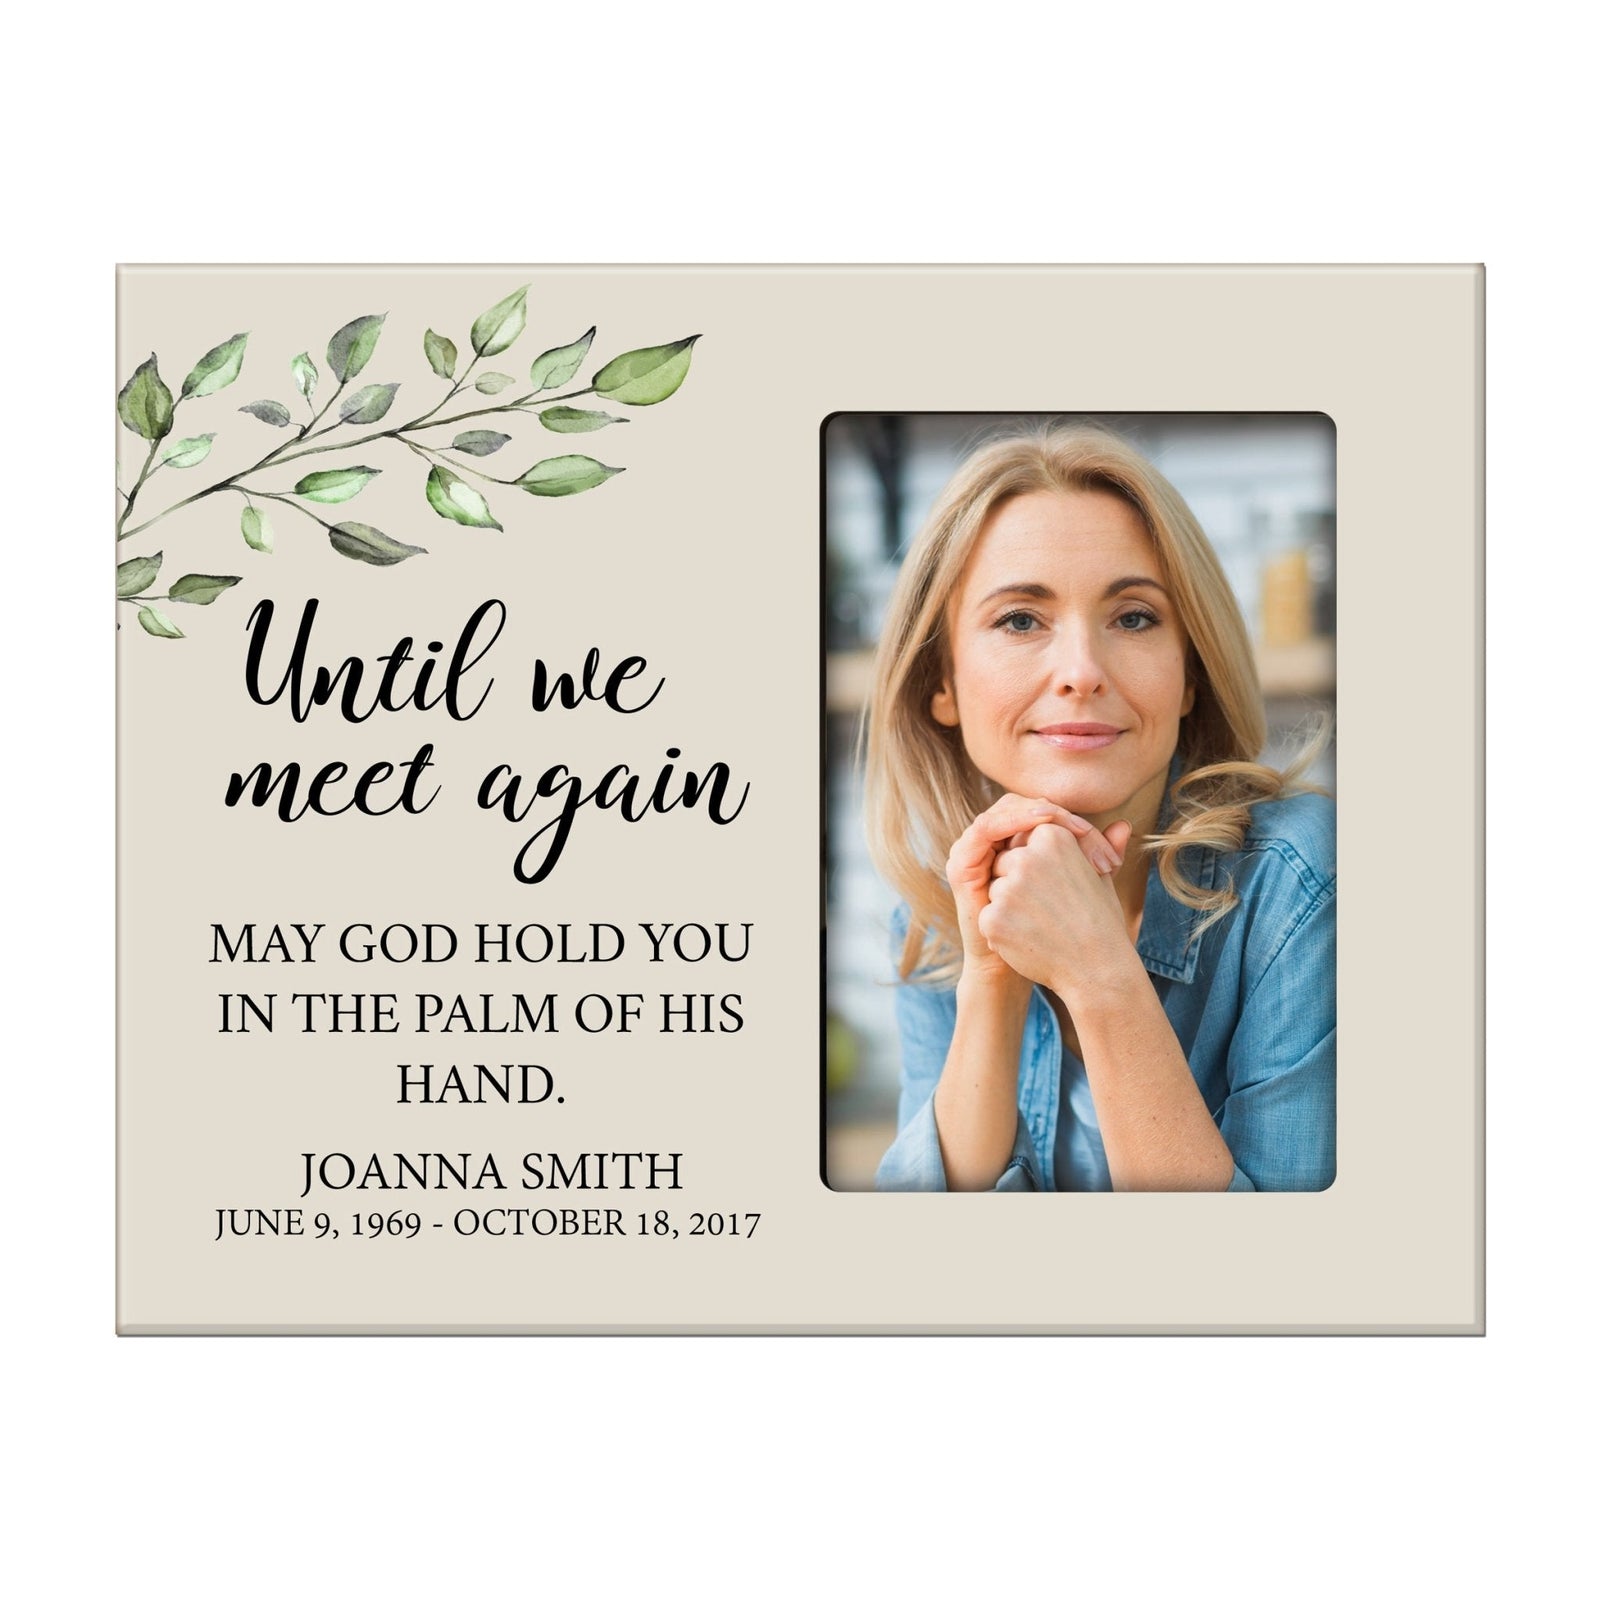 Personalized Horizontal 8x10 Wooden Memorial Picture Frame Holds 4x6 Photo - Until We Meet Again (Ivory) - LifeSong Milestones